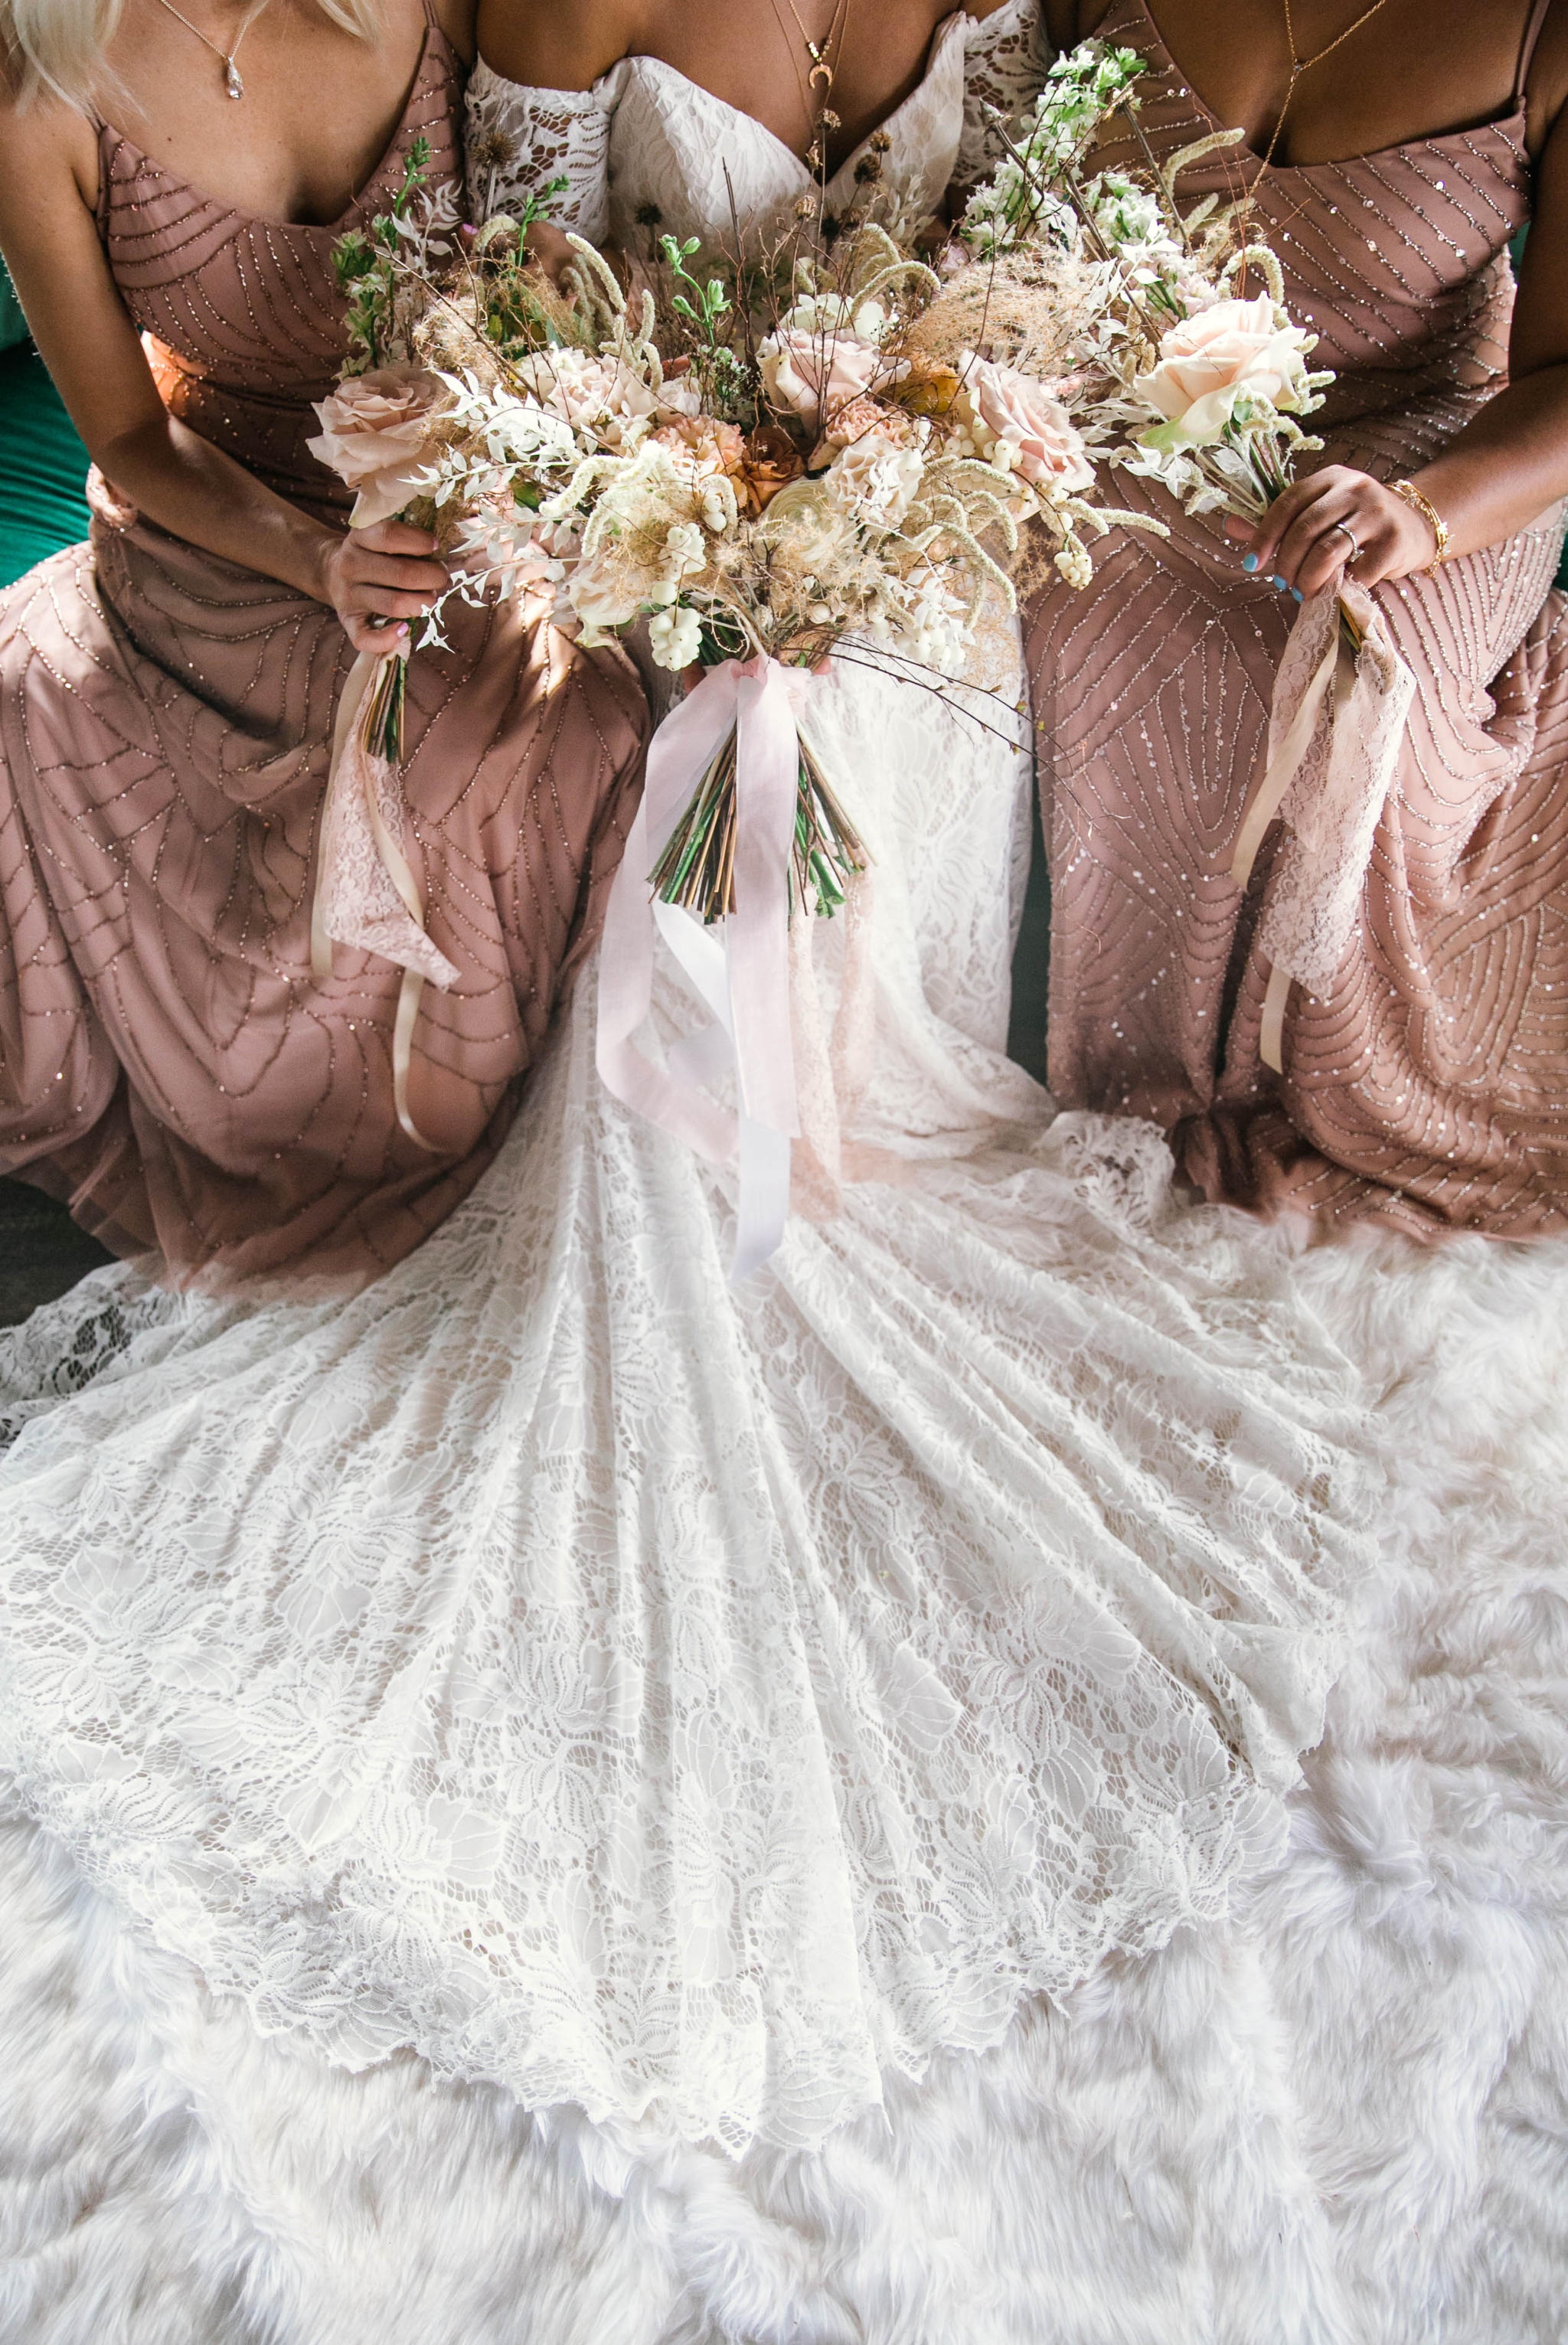  Indoor Natural light portrait of a black bride and her bridesmaids in a boho wedding dress with light pink bridesmaids dresses sitting on an emerald tufted sofa - laughing and having fun with each other- flowers in natural african american hair - oa